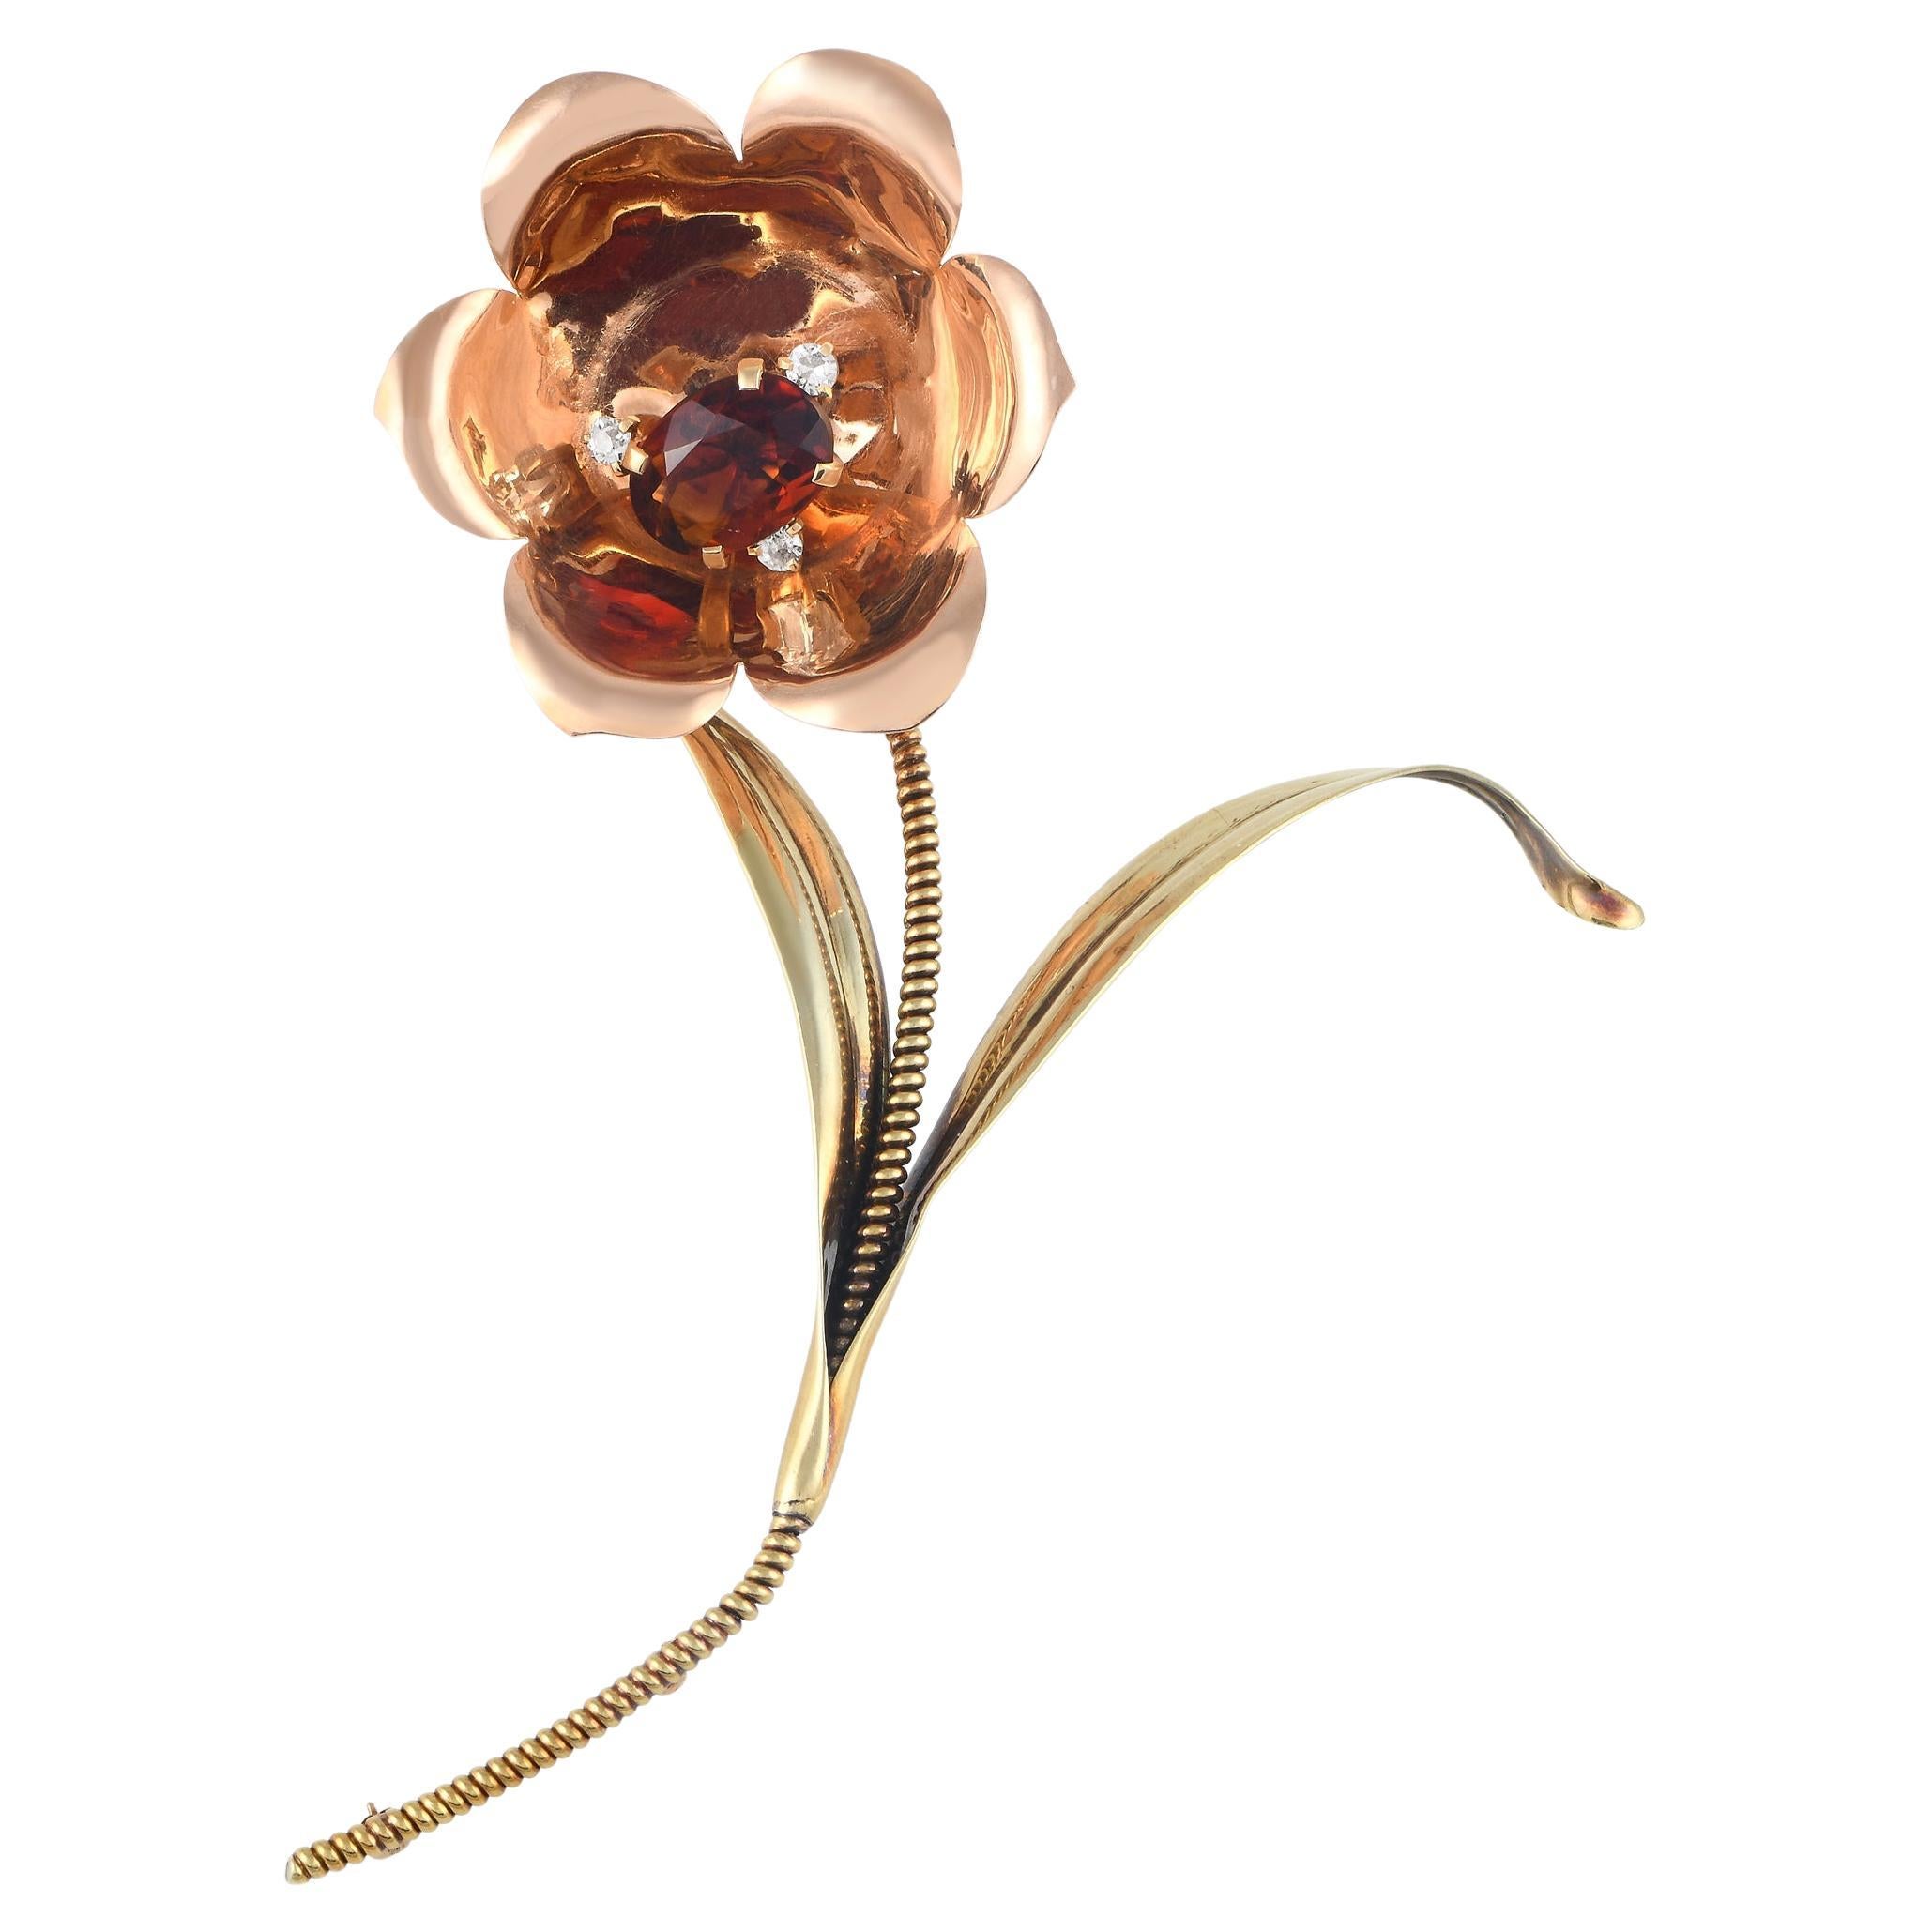 Cartier 14K Yellow and Rose Gold Diamond and Citrine En Tremblant Flower Brooch